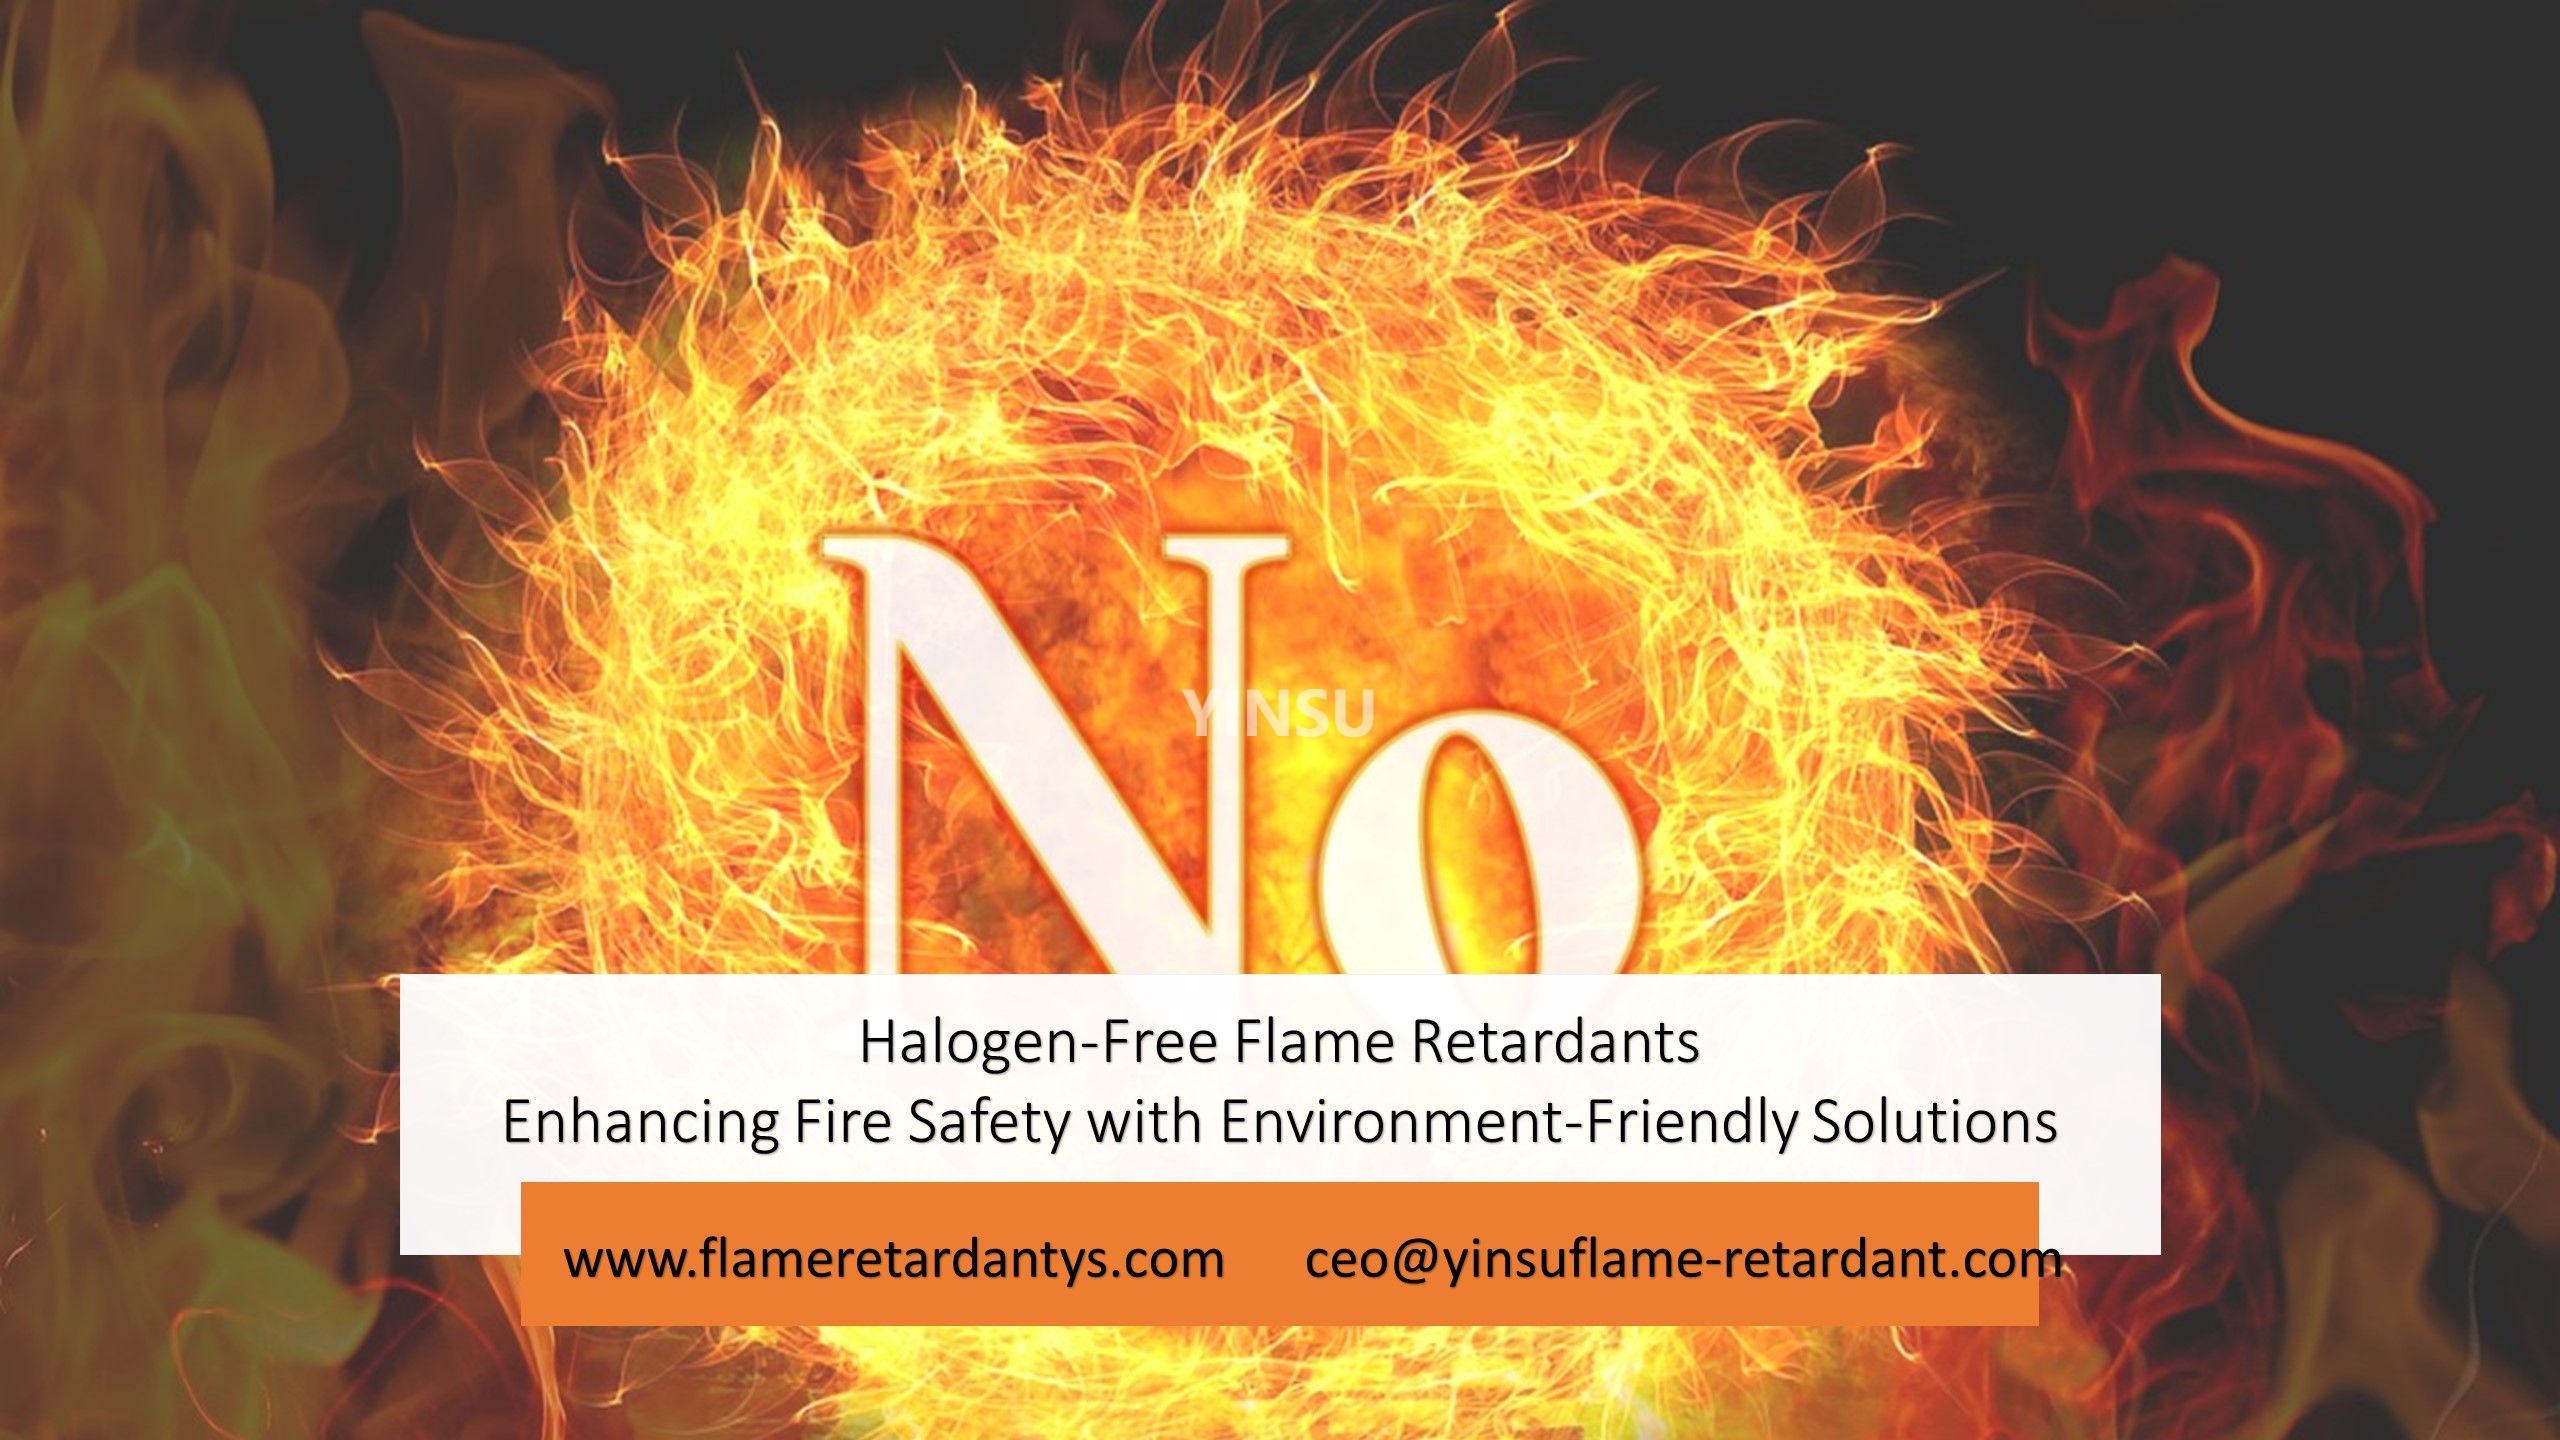 3. Halogen-Free Flame Retardants Enhancing Fire Safety with Environment-Friendly Solutions